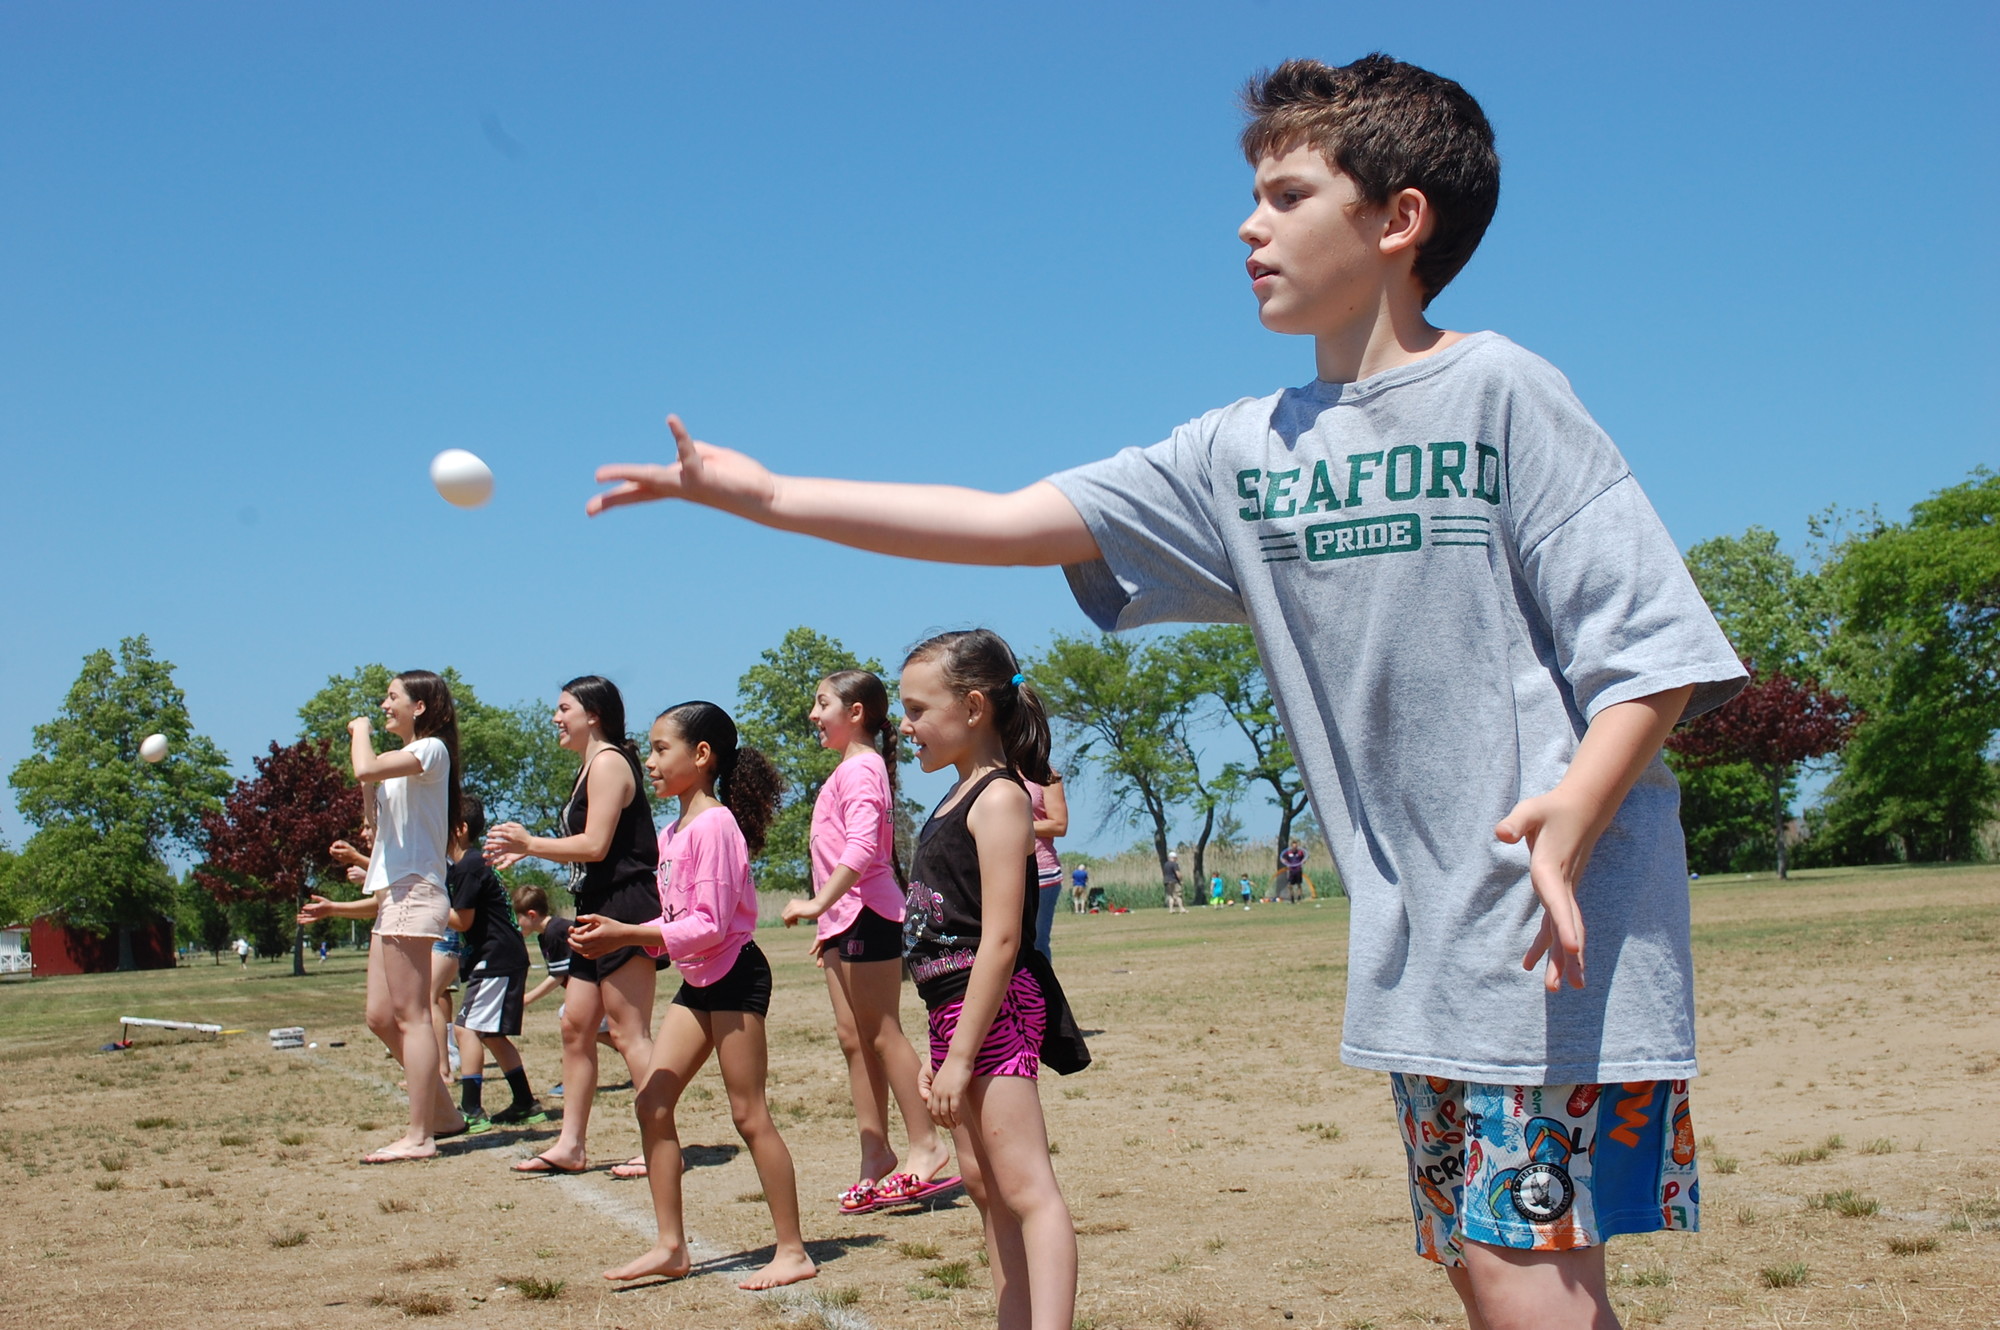 Max Schertz, 10, took part in the egg toss, one of the games organized by the Wantagh Kiwanis Club.